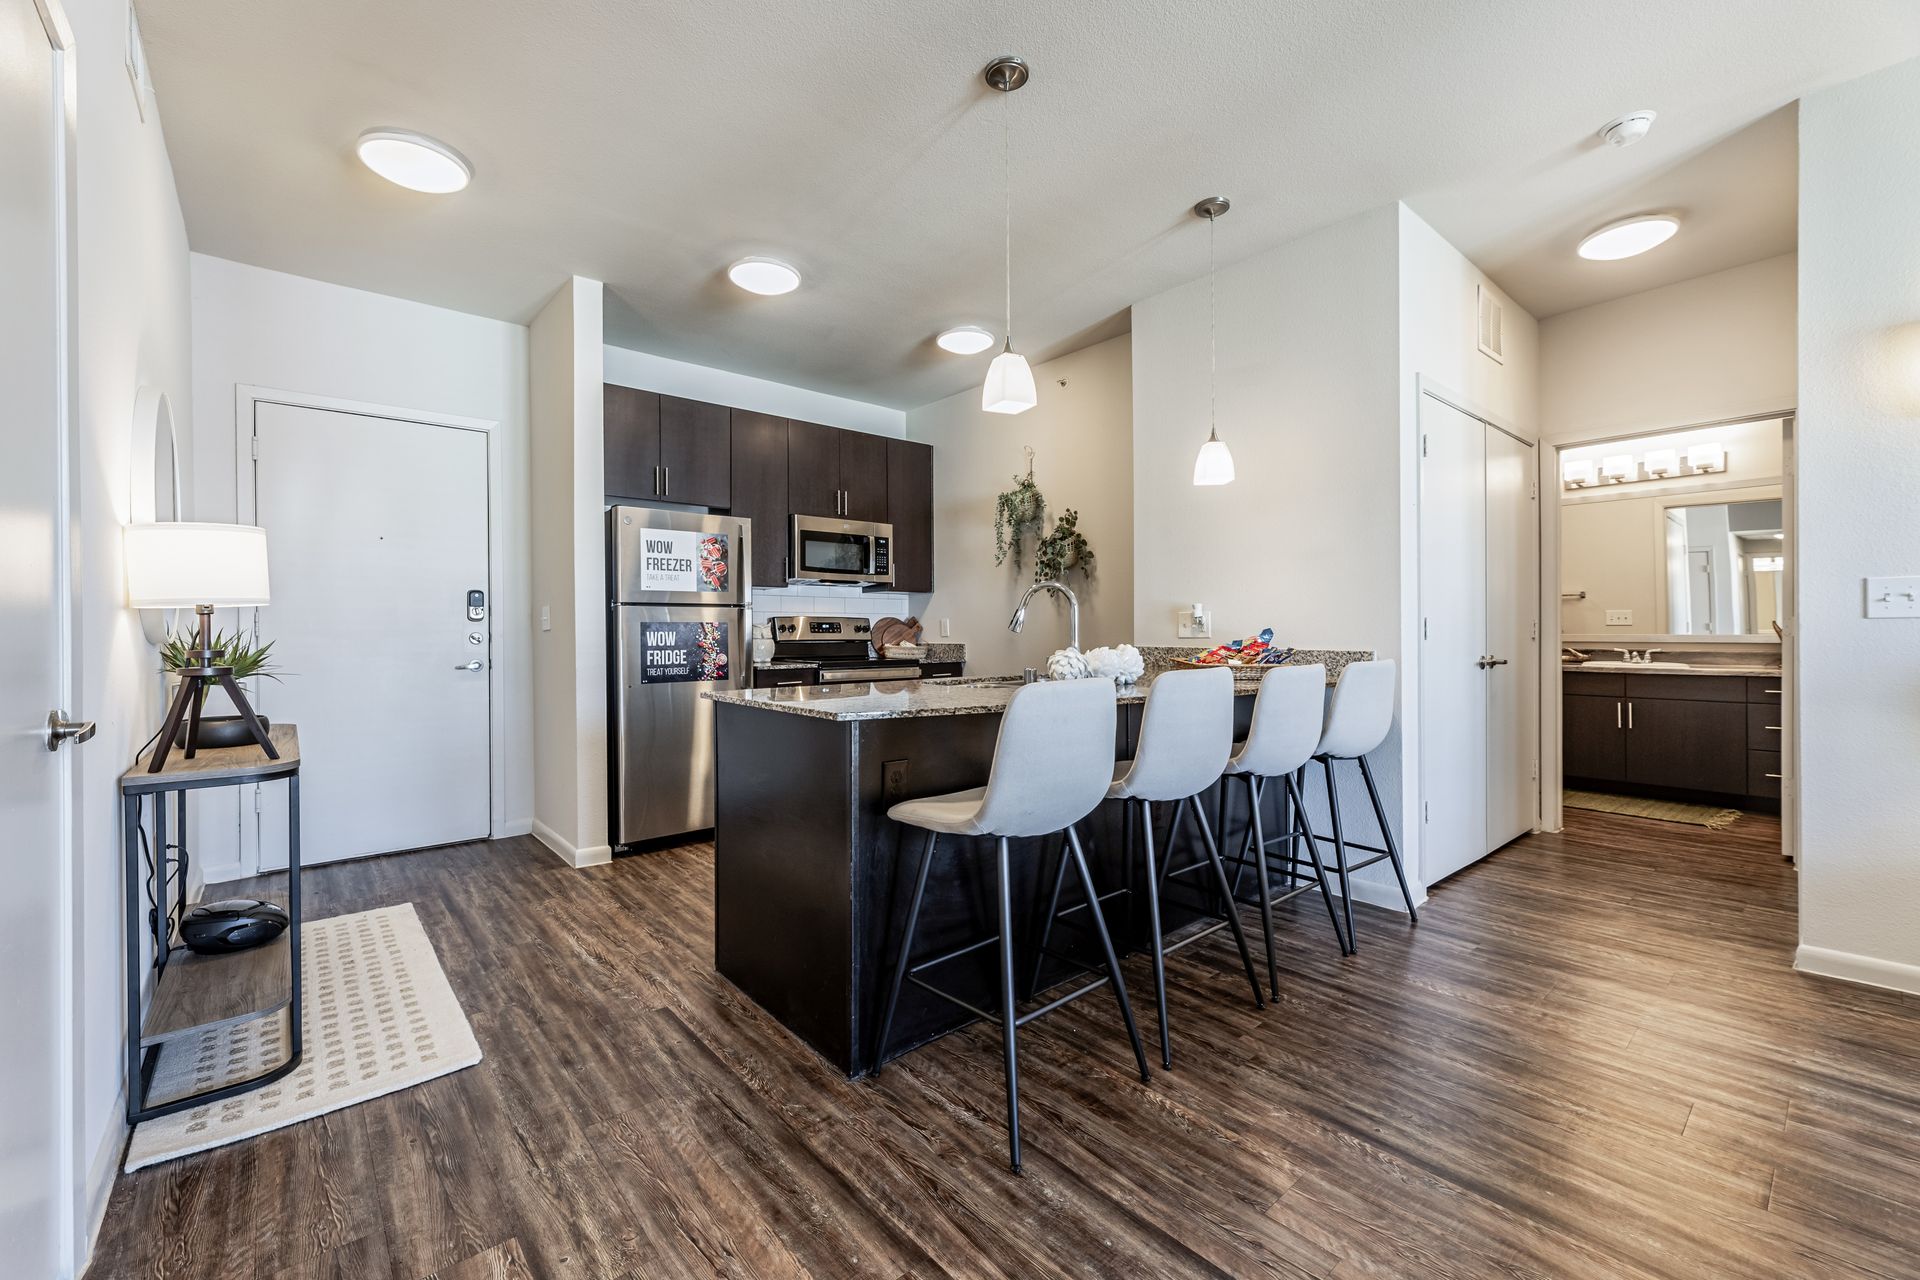 A kitchen with stainless steel appliances, wooden floors, and a large island at Parkside at Craig Ranch.